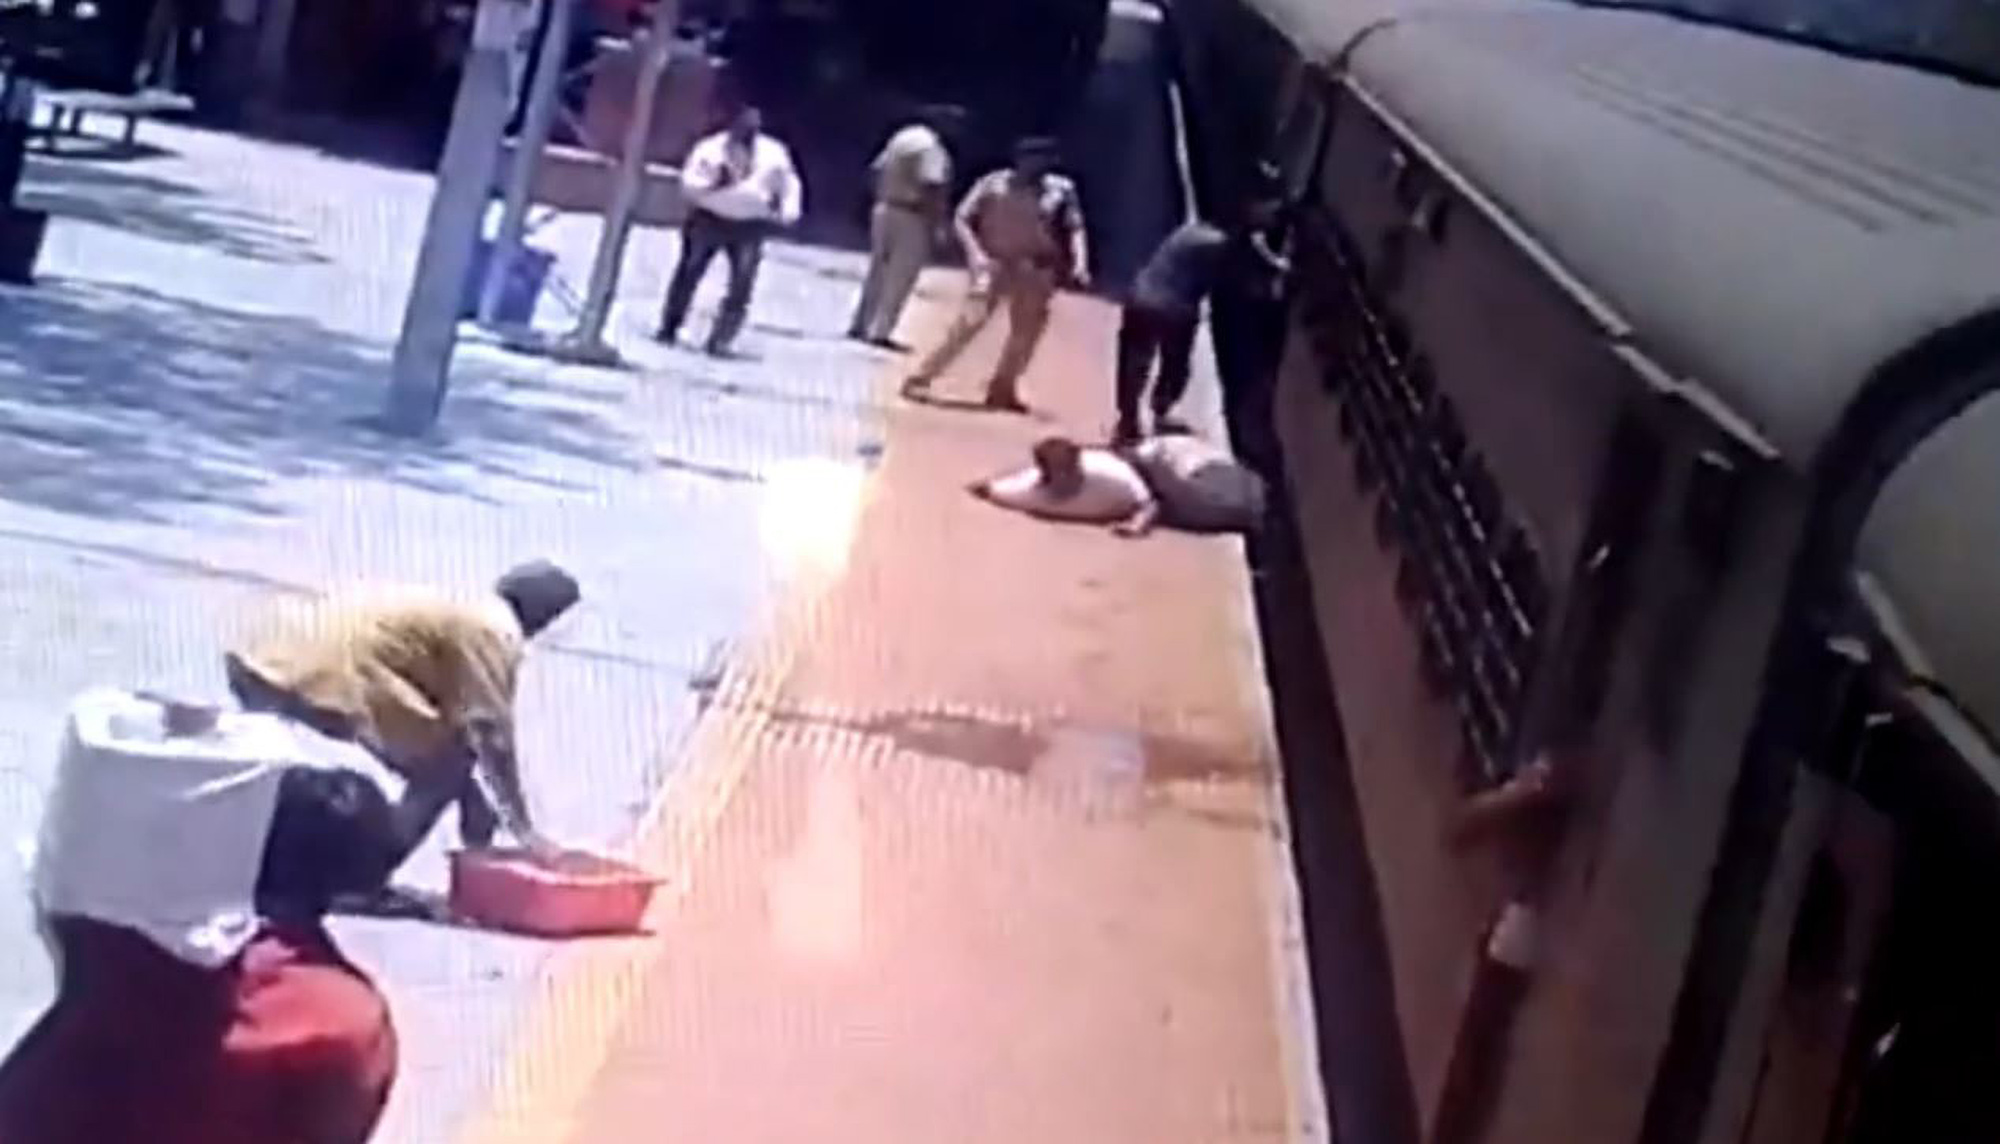 Read more about the article Moment Boy Slips On Platform And Falls Onto Tracks While Trying To Catch Moving Train